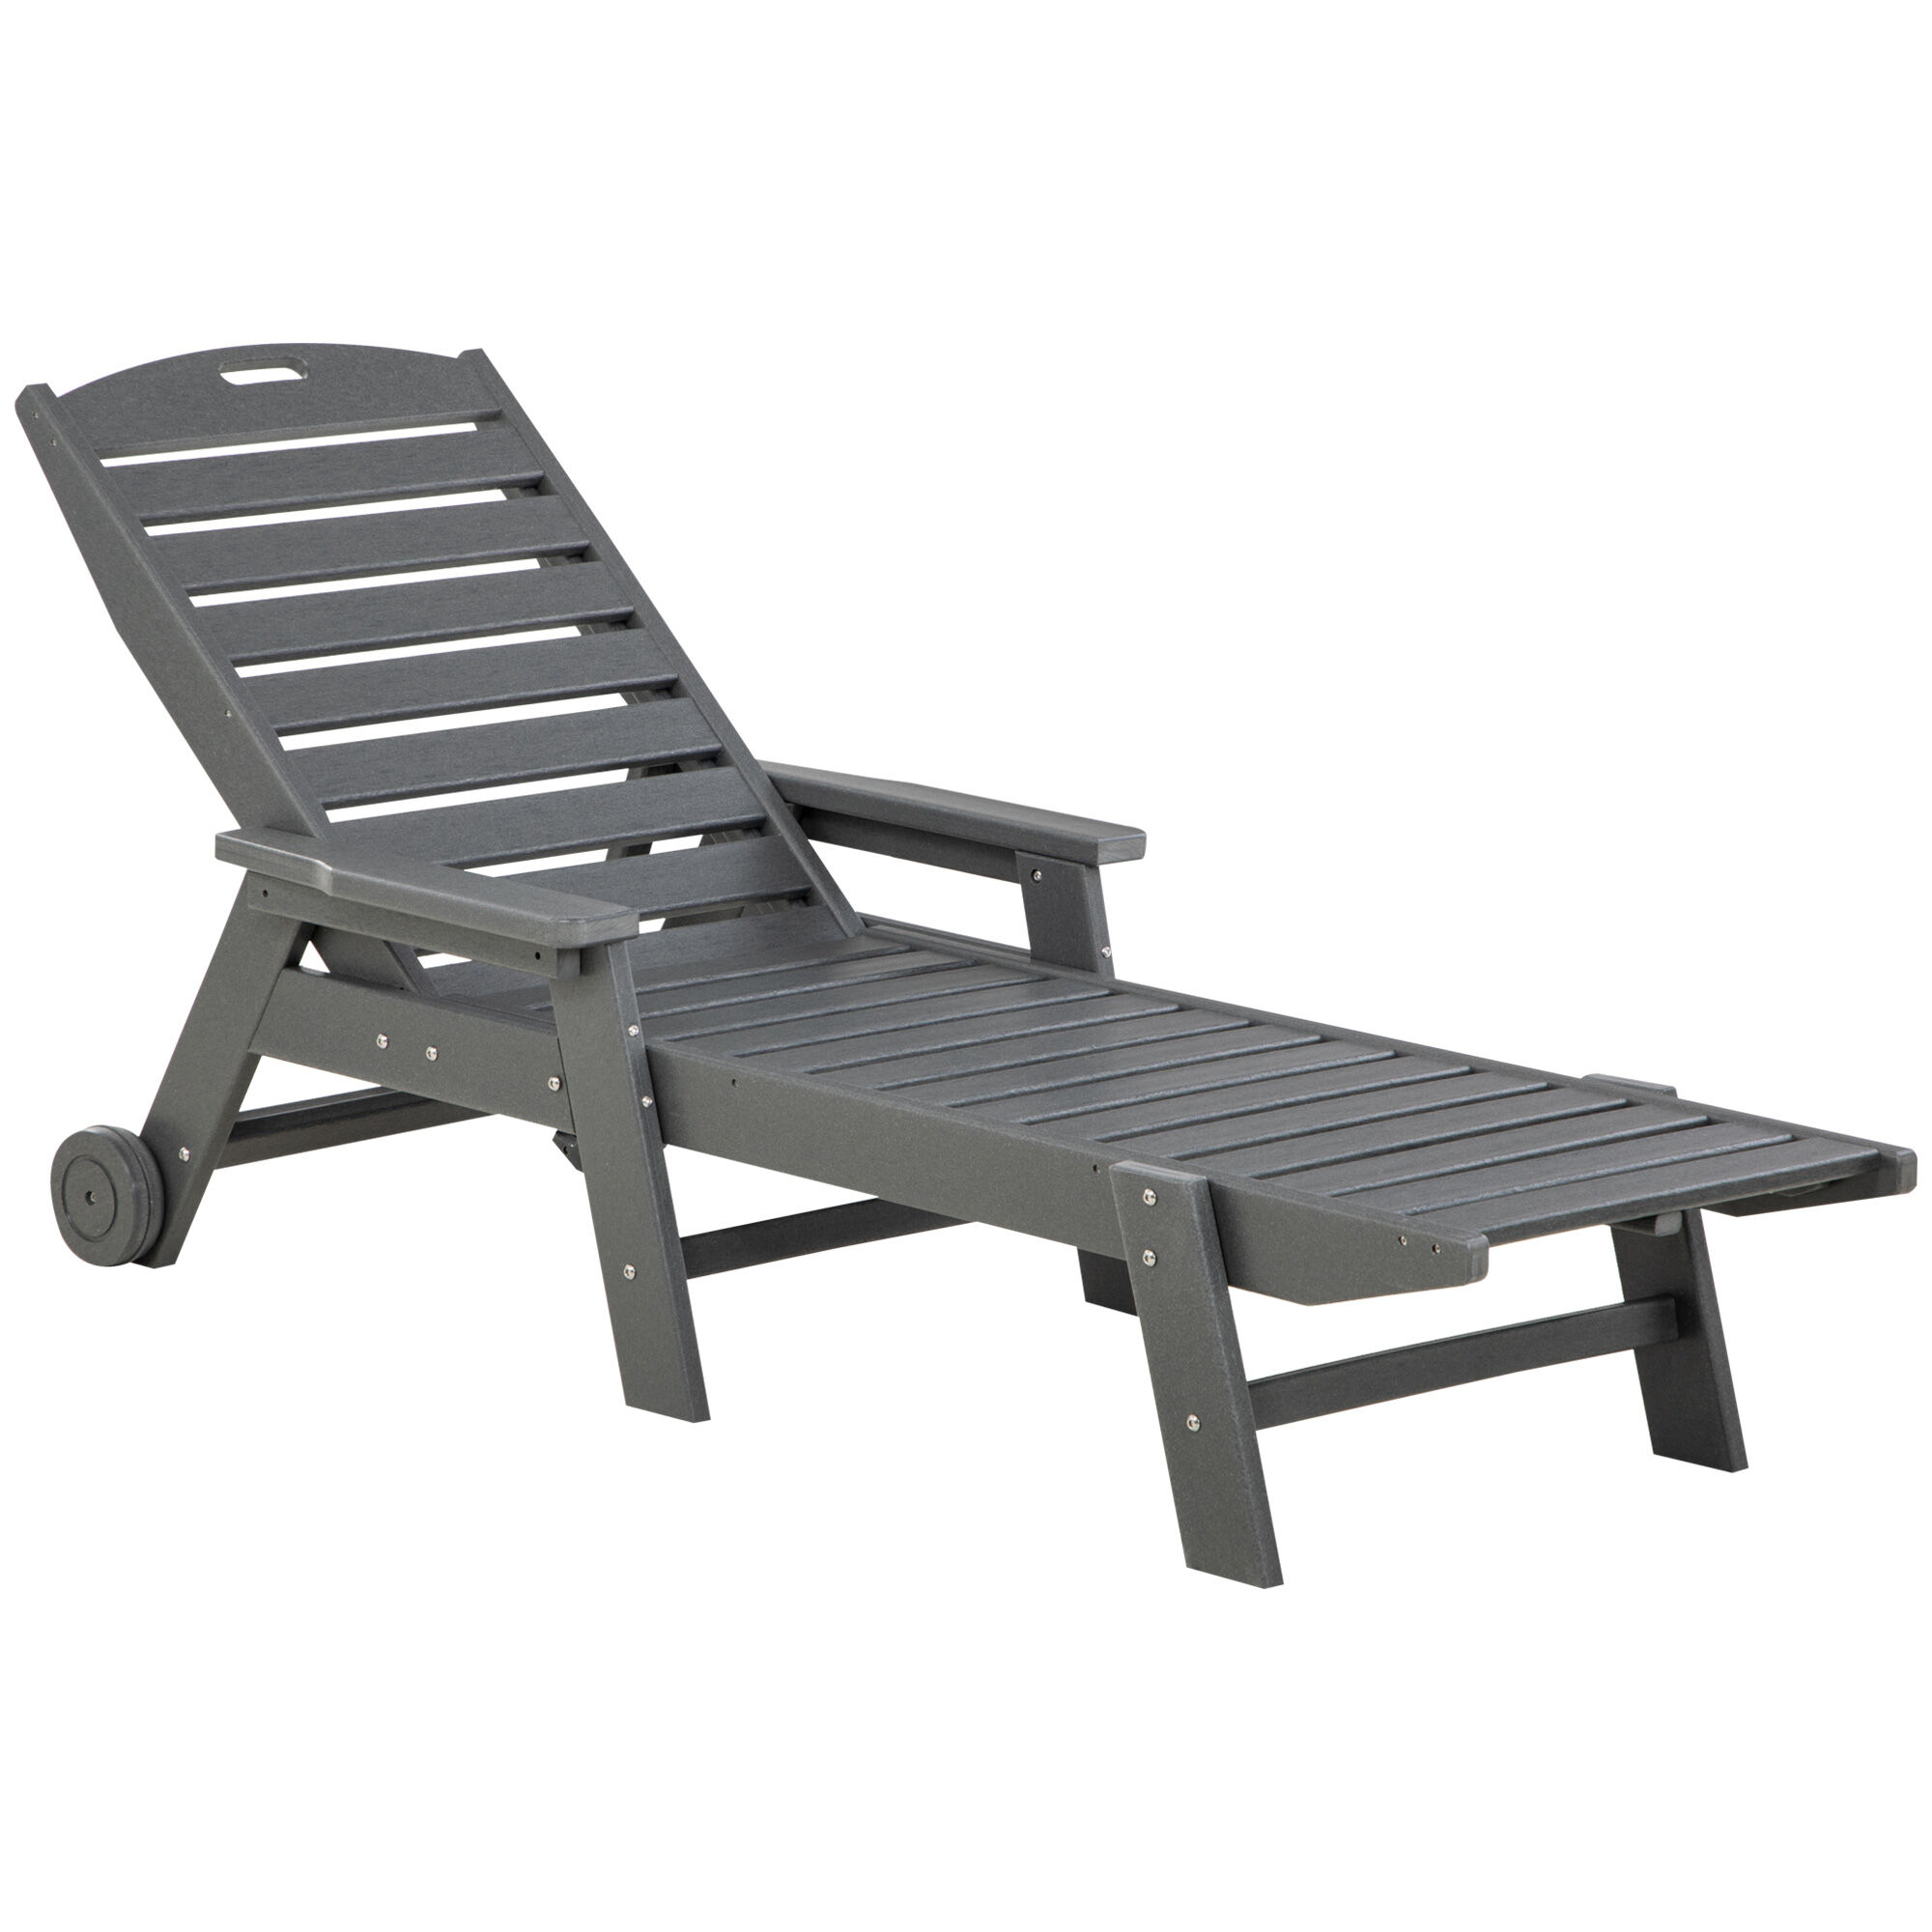 Outsunny Outdoor Chaise Lounge Chair Recliner Adjustable Back Wheels for Beach Poolside Patio in Light Gray   Aosom.com